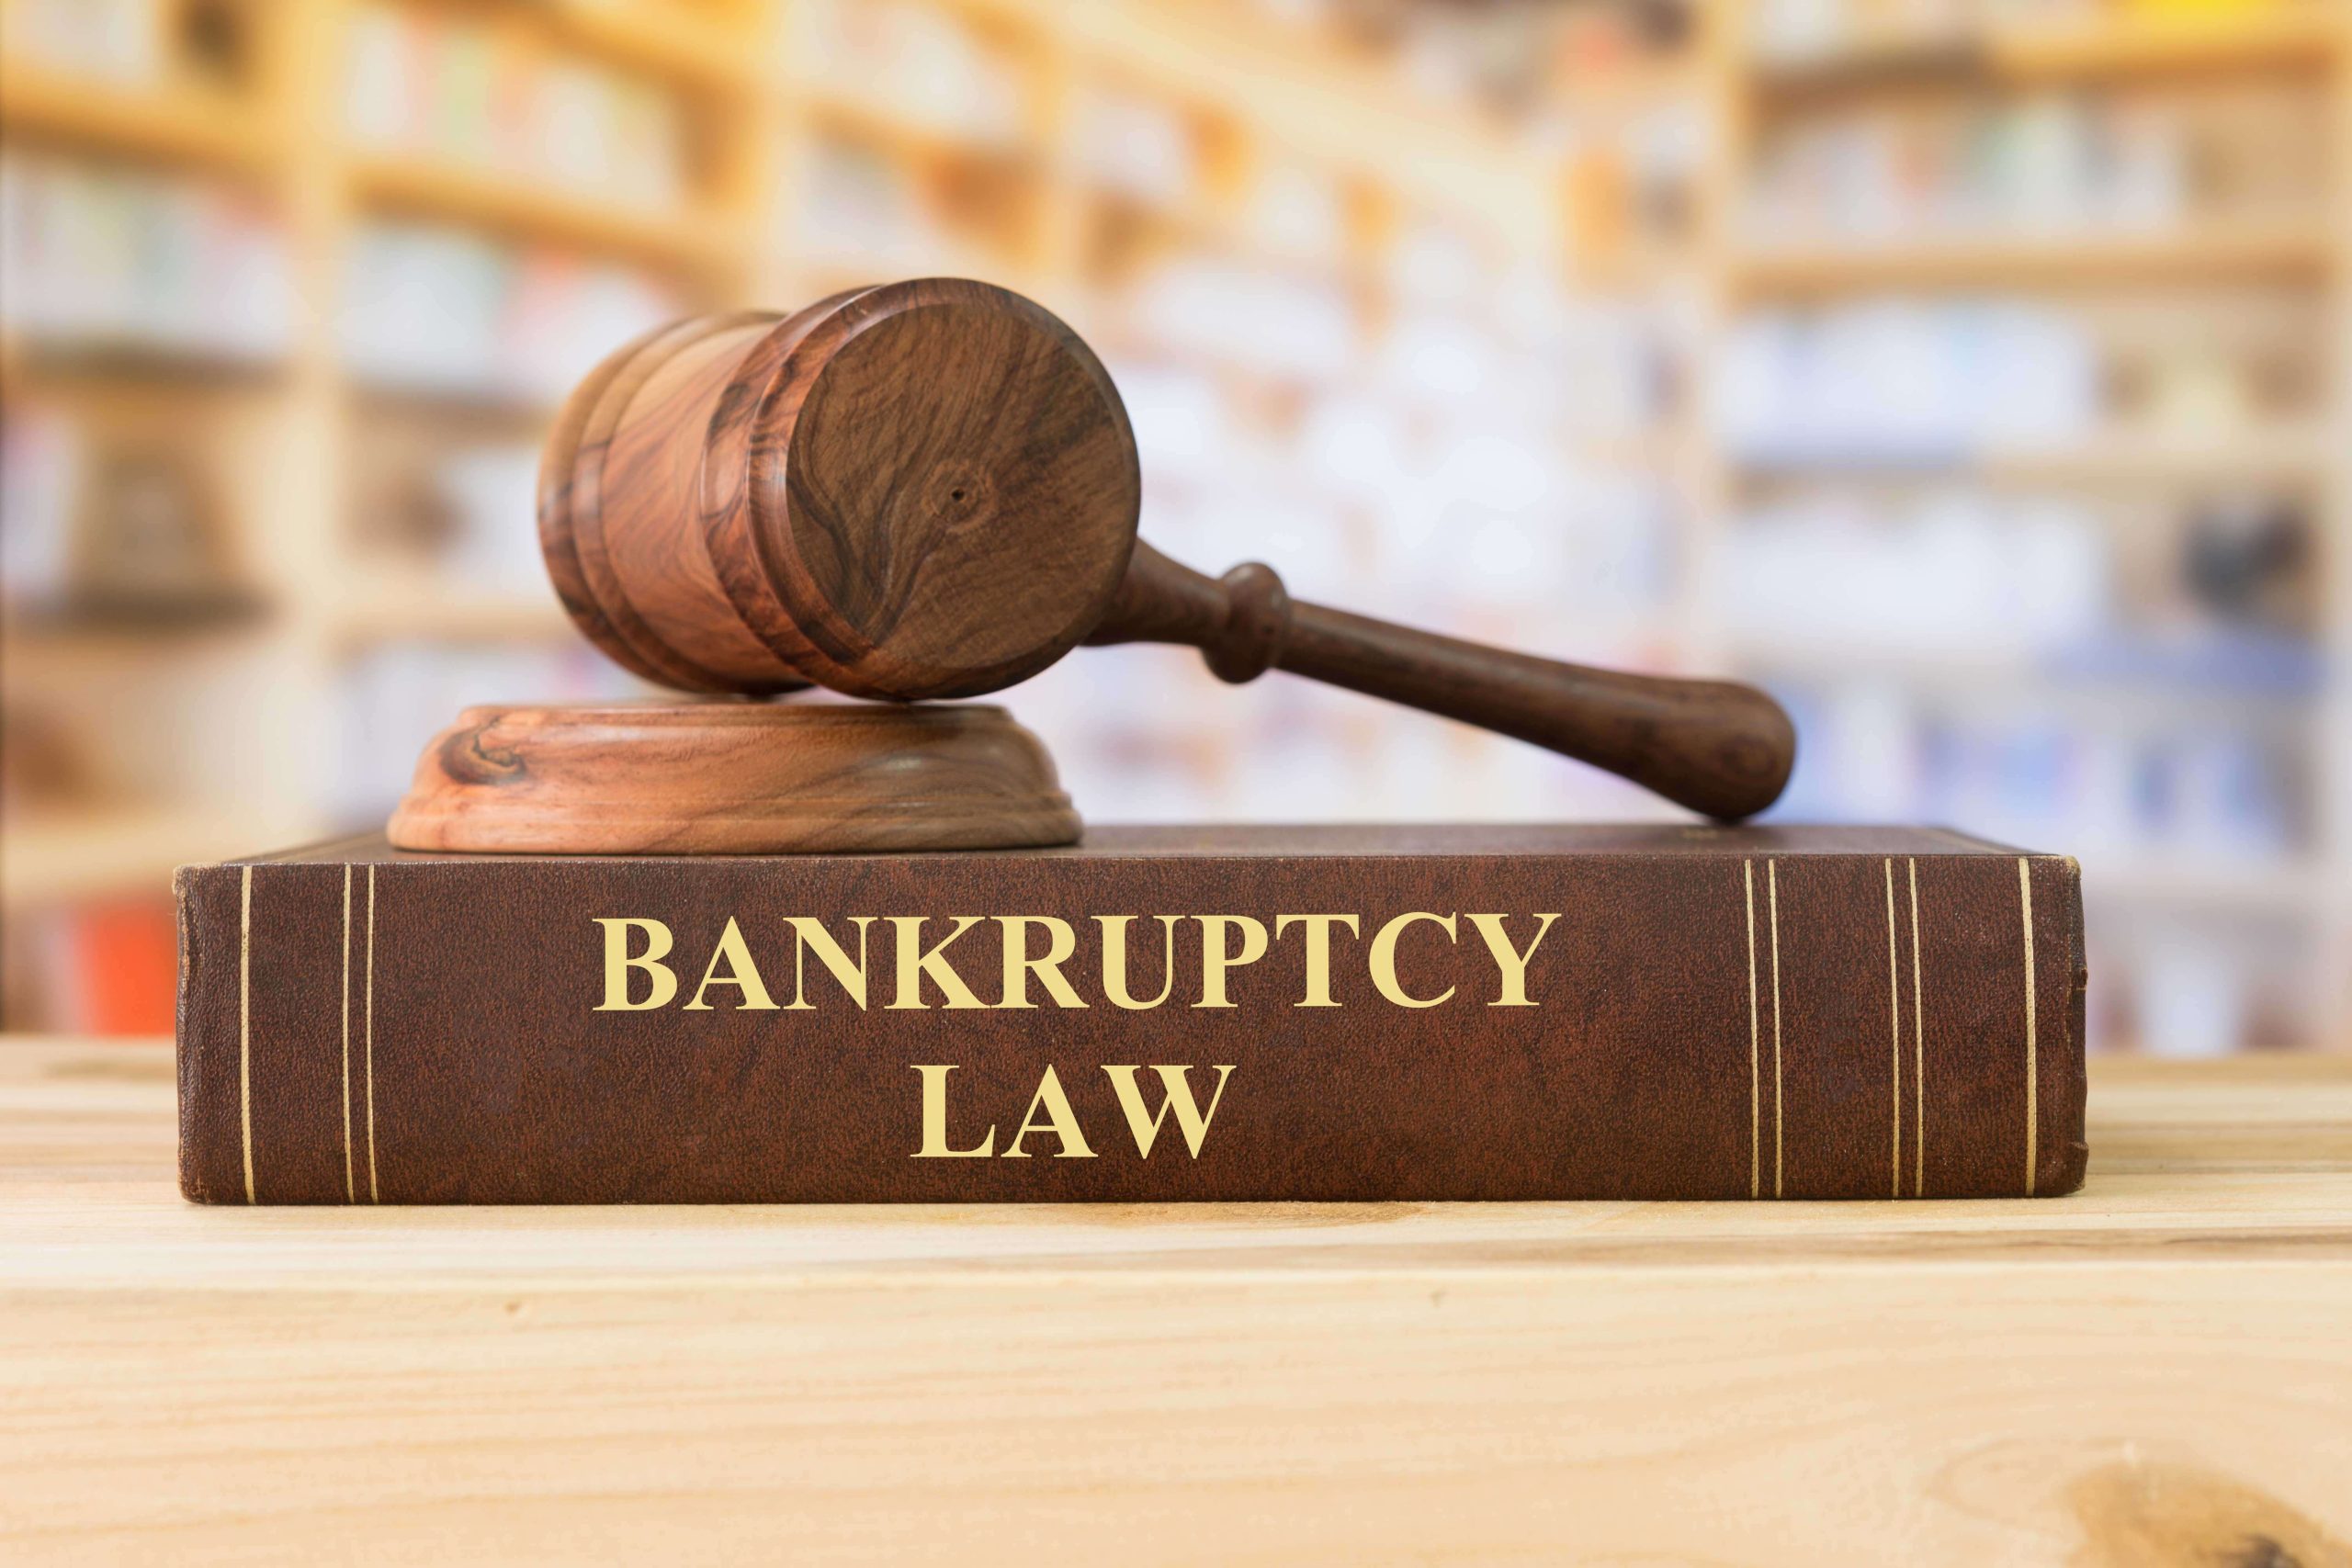 Understand bankruptcy law in Chico, CA - contact our firm for guidance!